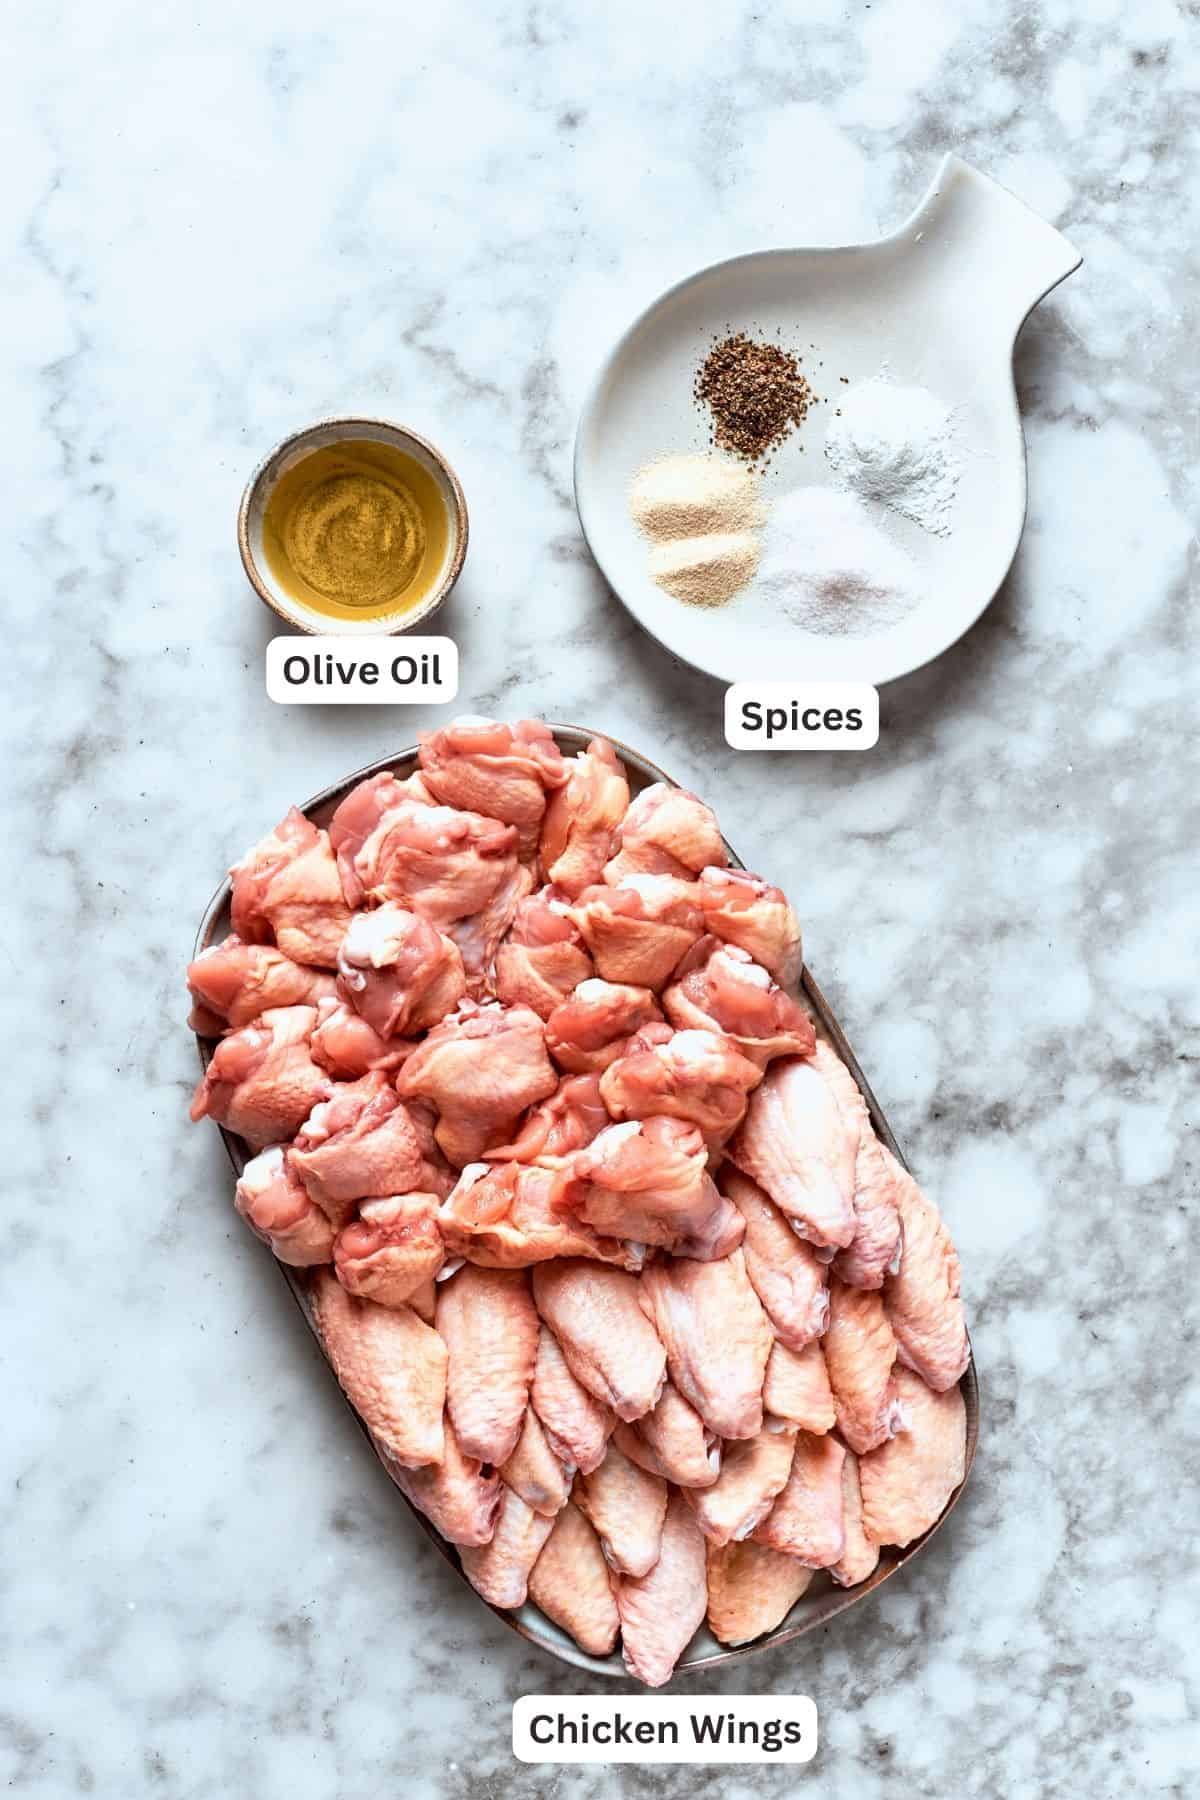 Ingredients for buffalo wings are labeled and portioned: chicken, olive oil, spices, baking powder.